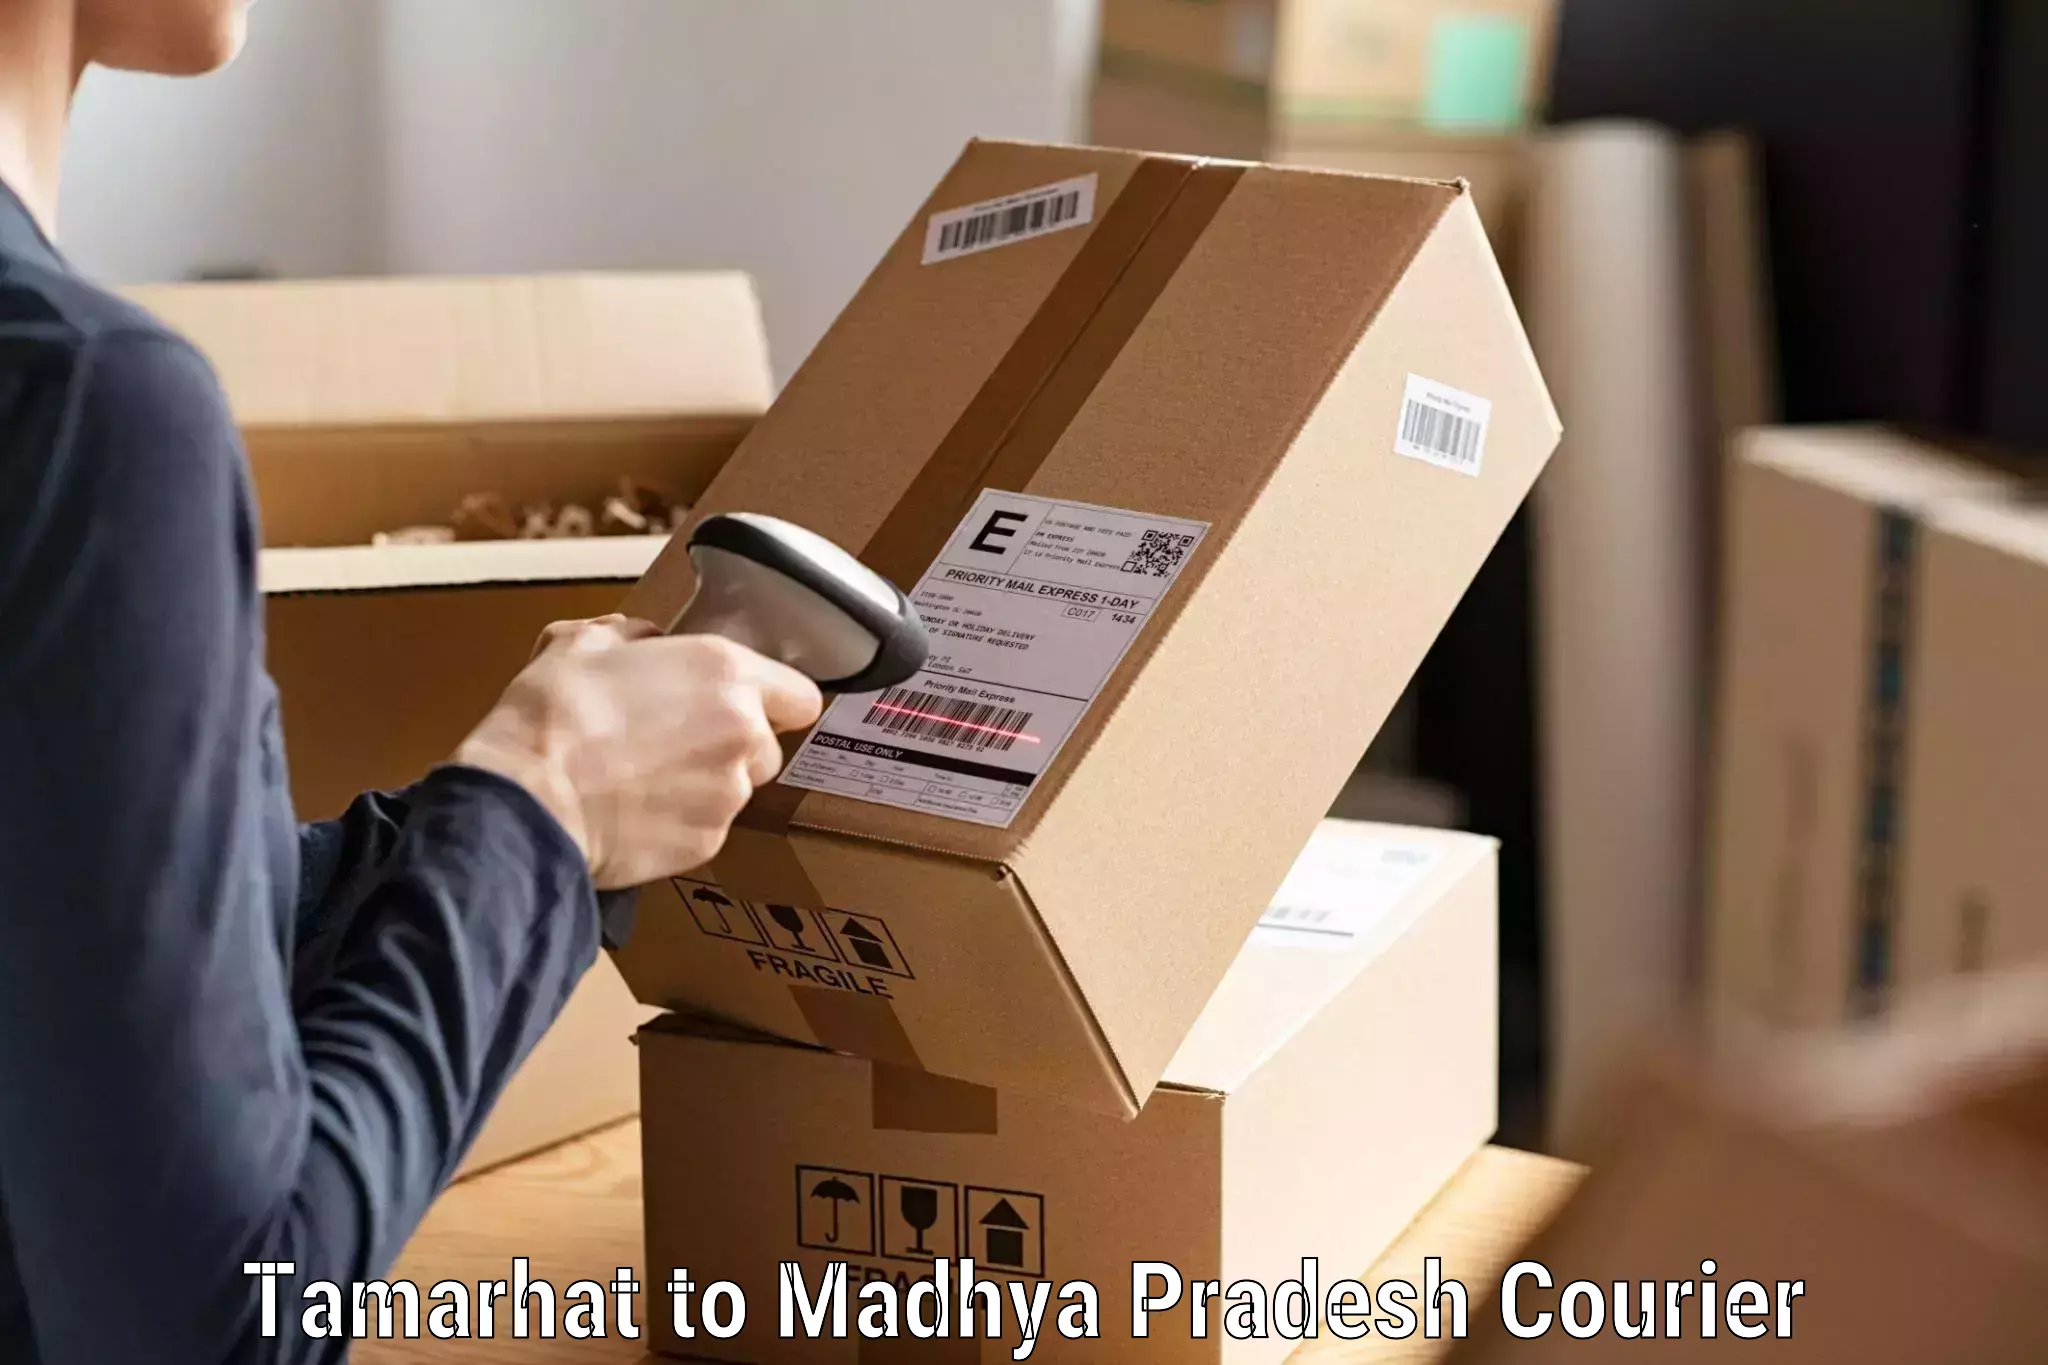 Multi-service courier options Tamarhat to Depalpur